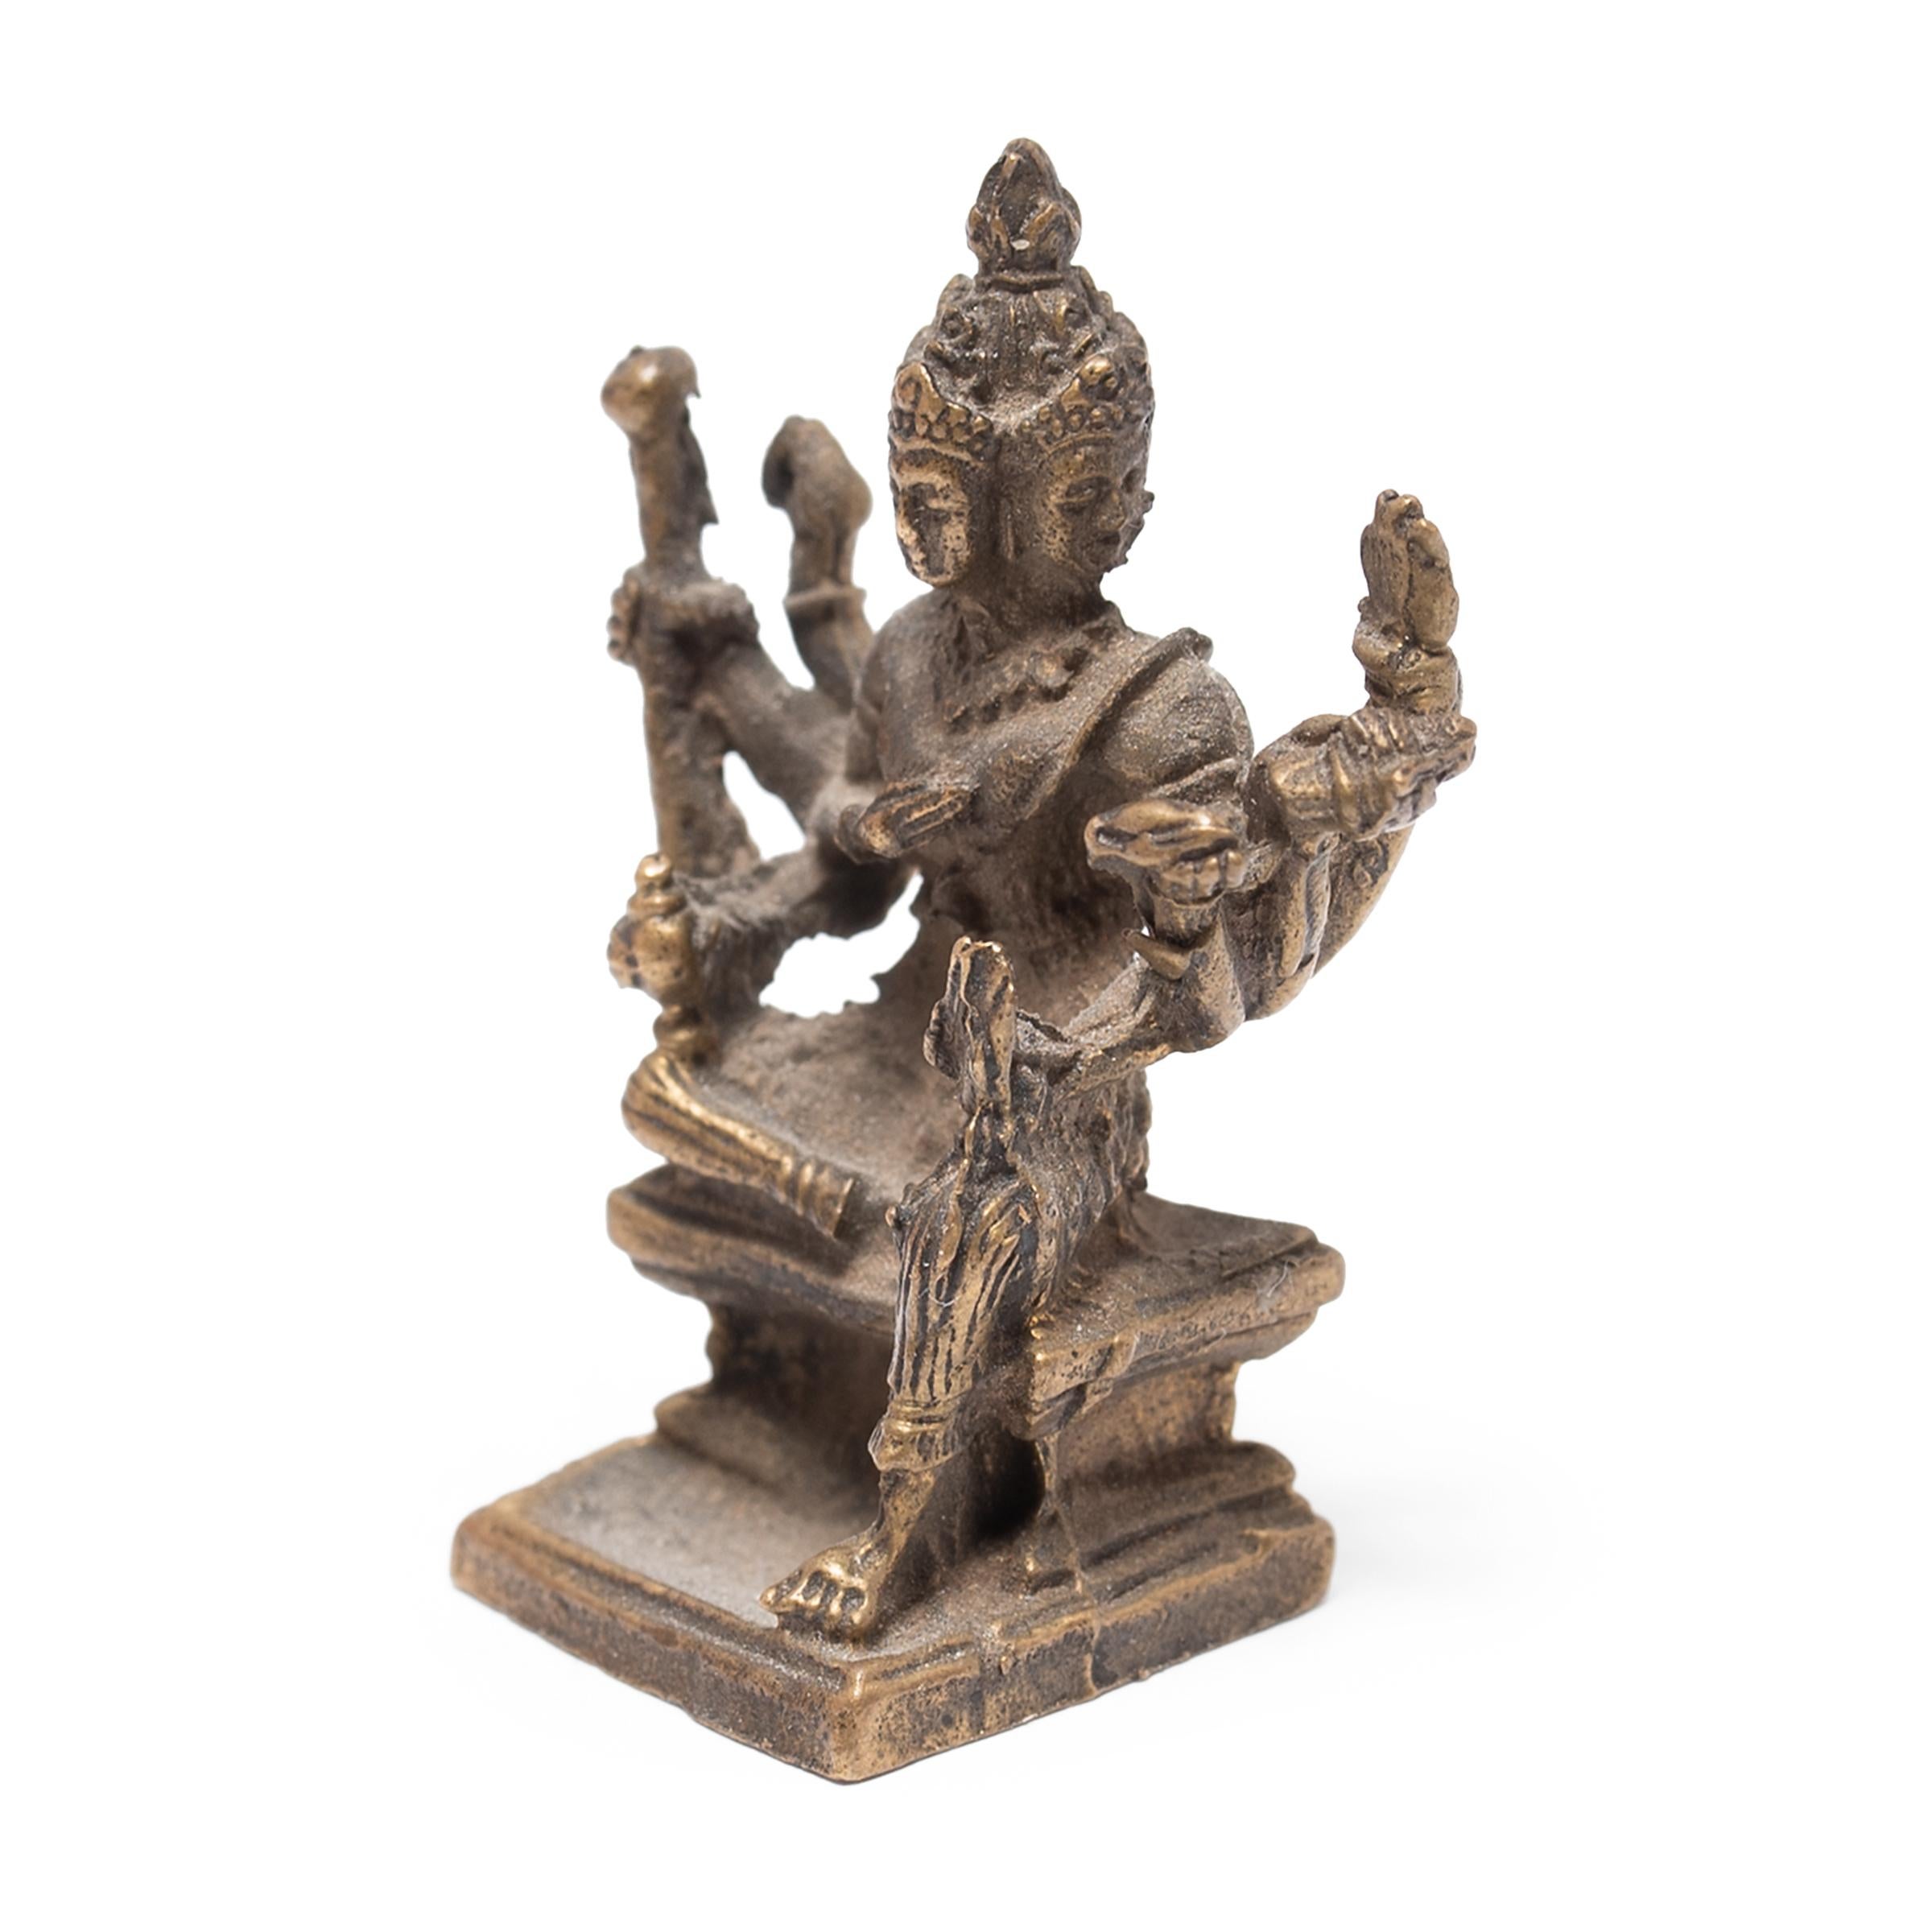 This petite brass sculpture is of the eight-armed goddess Mahapratisara, worshipped in Tibetan Buddhism as a protecting and prosperity granting Bodhisattva. She is considered to be an emanation of Buddha Ratnasambhava, one of the five meditation